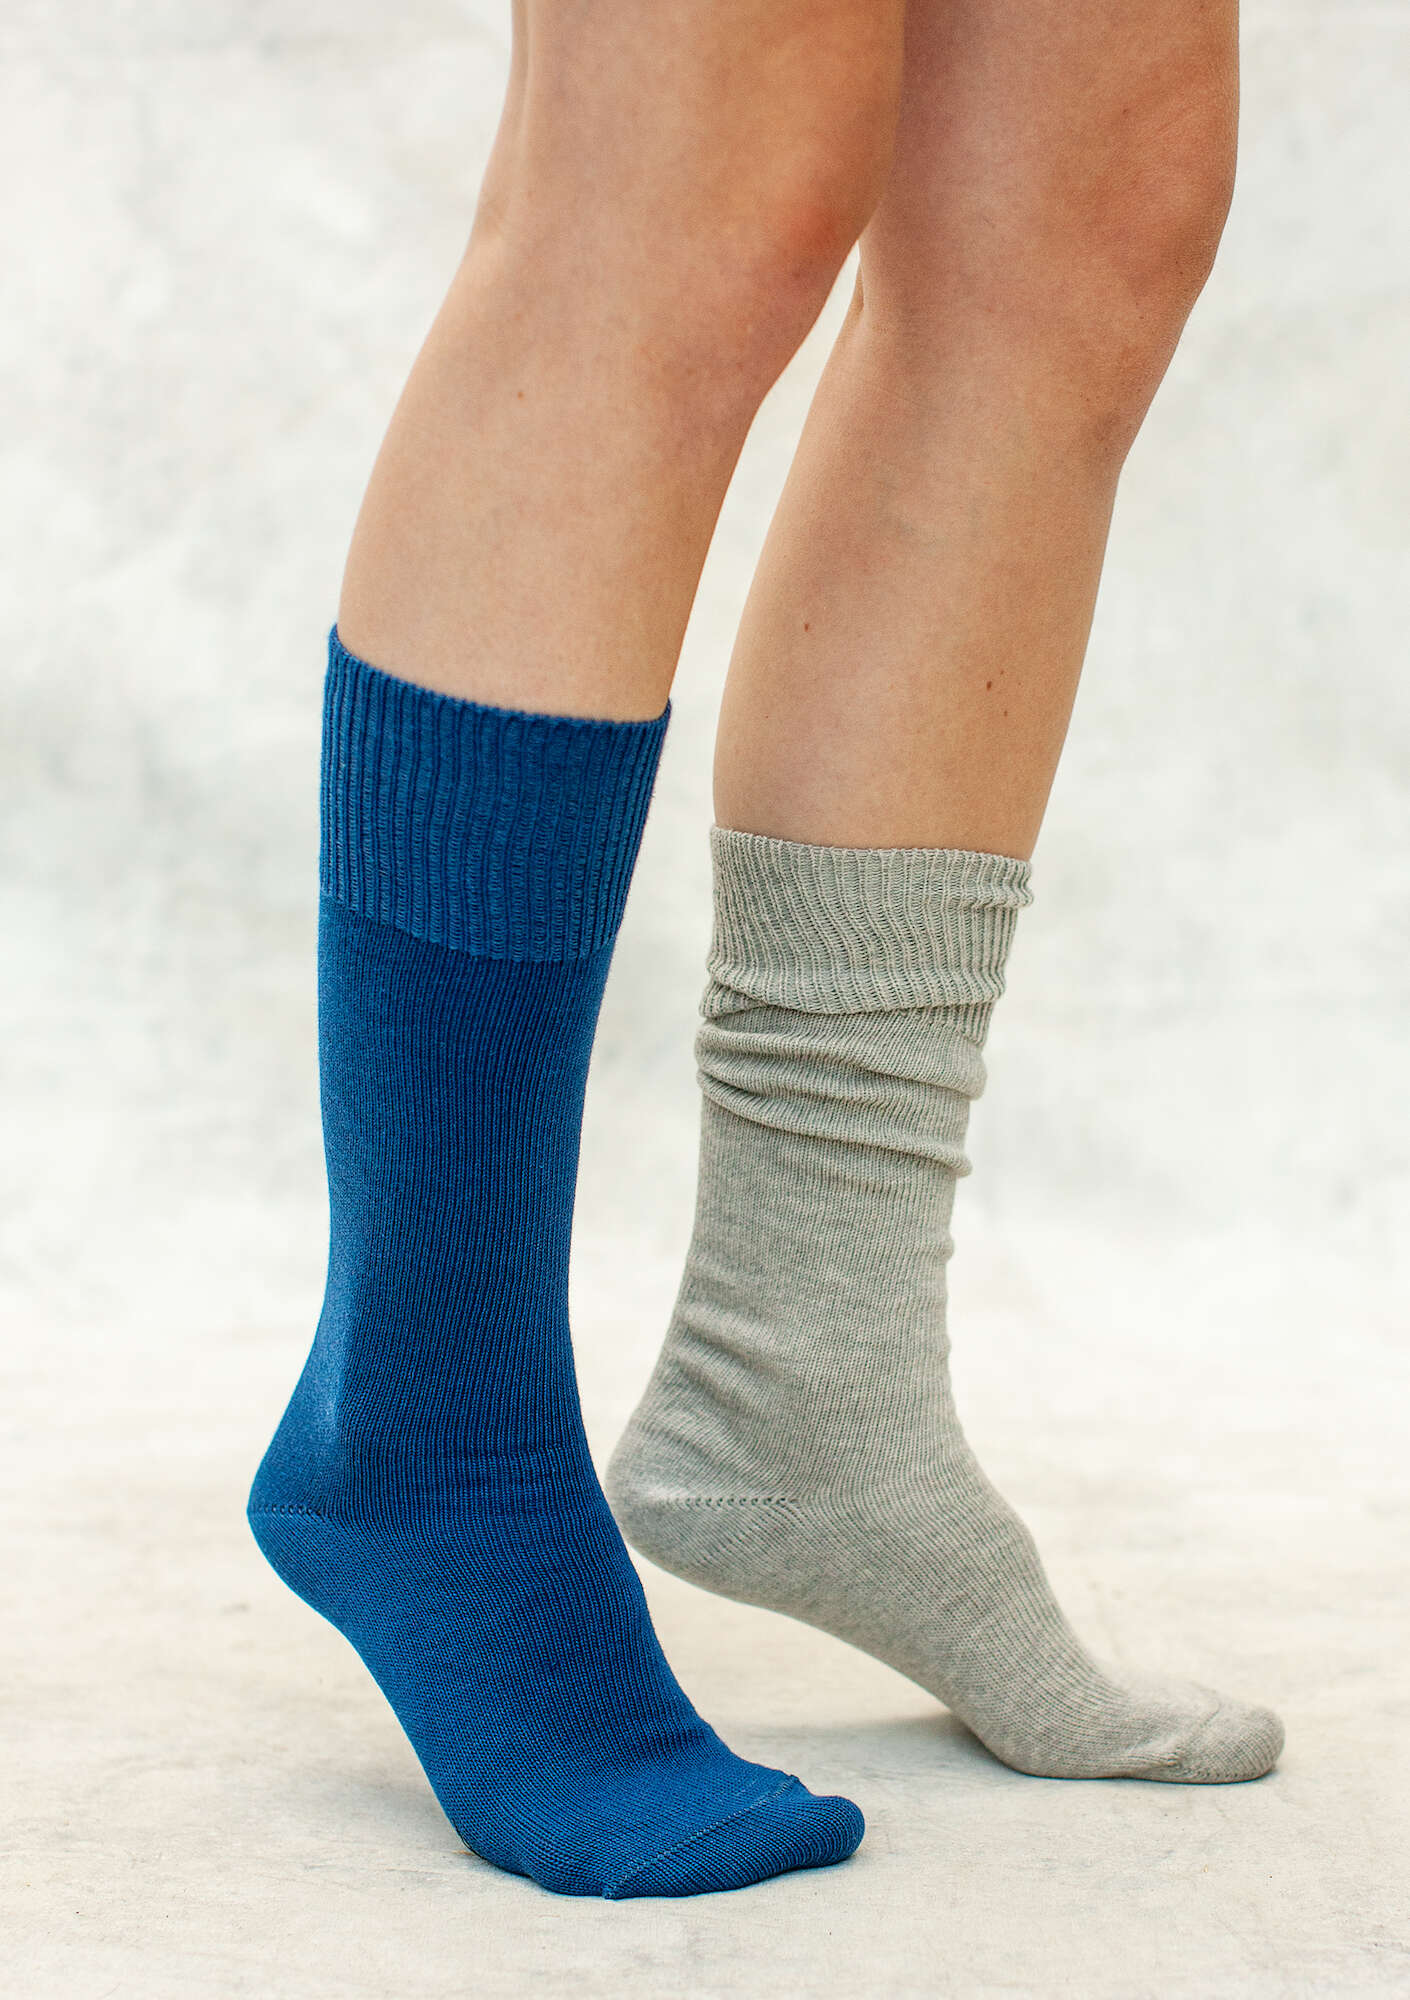 Solid-colored knee-highs in organic cotton indigo